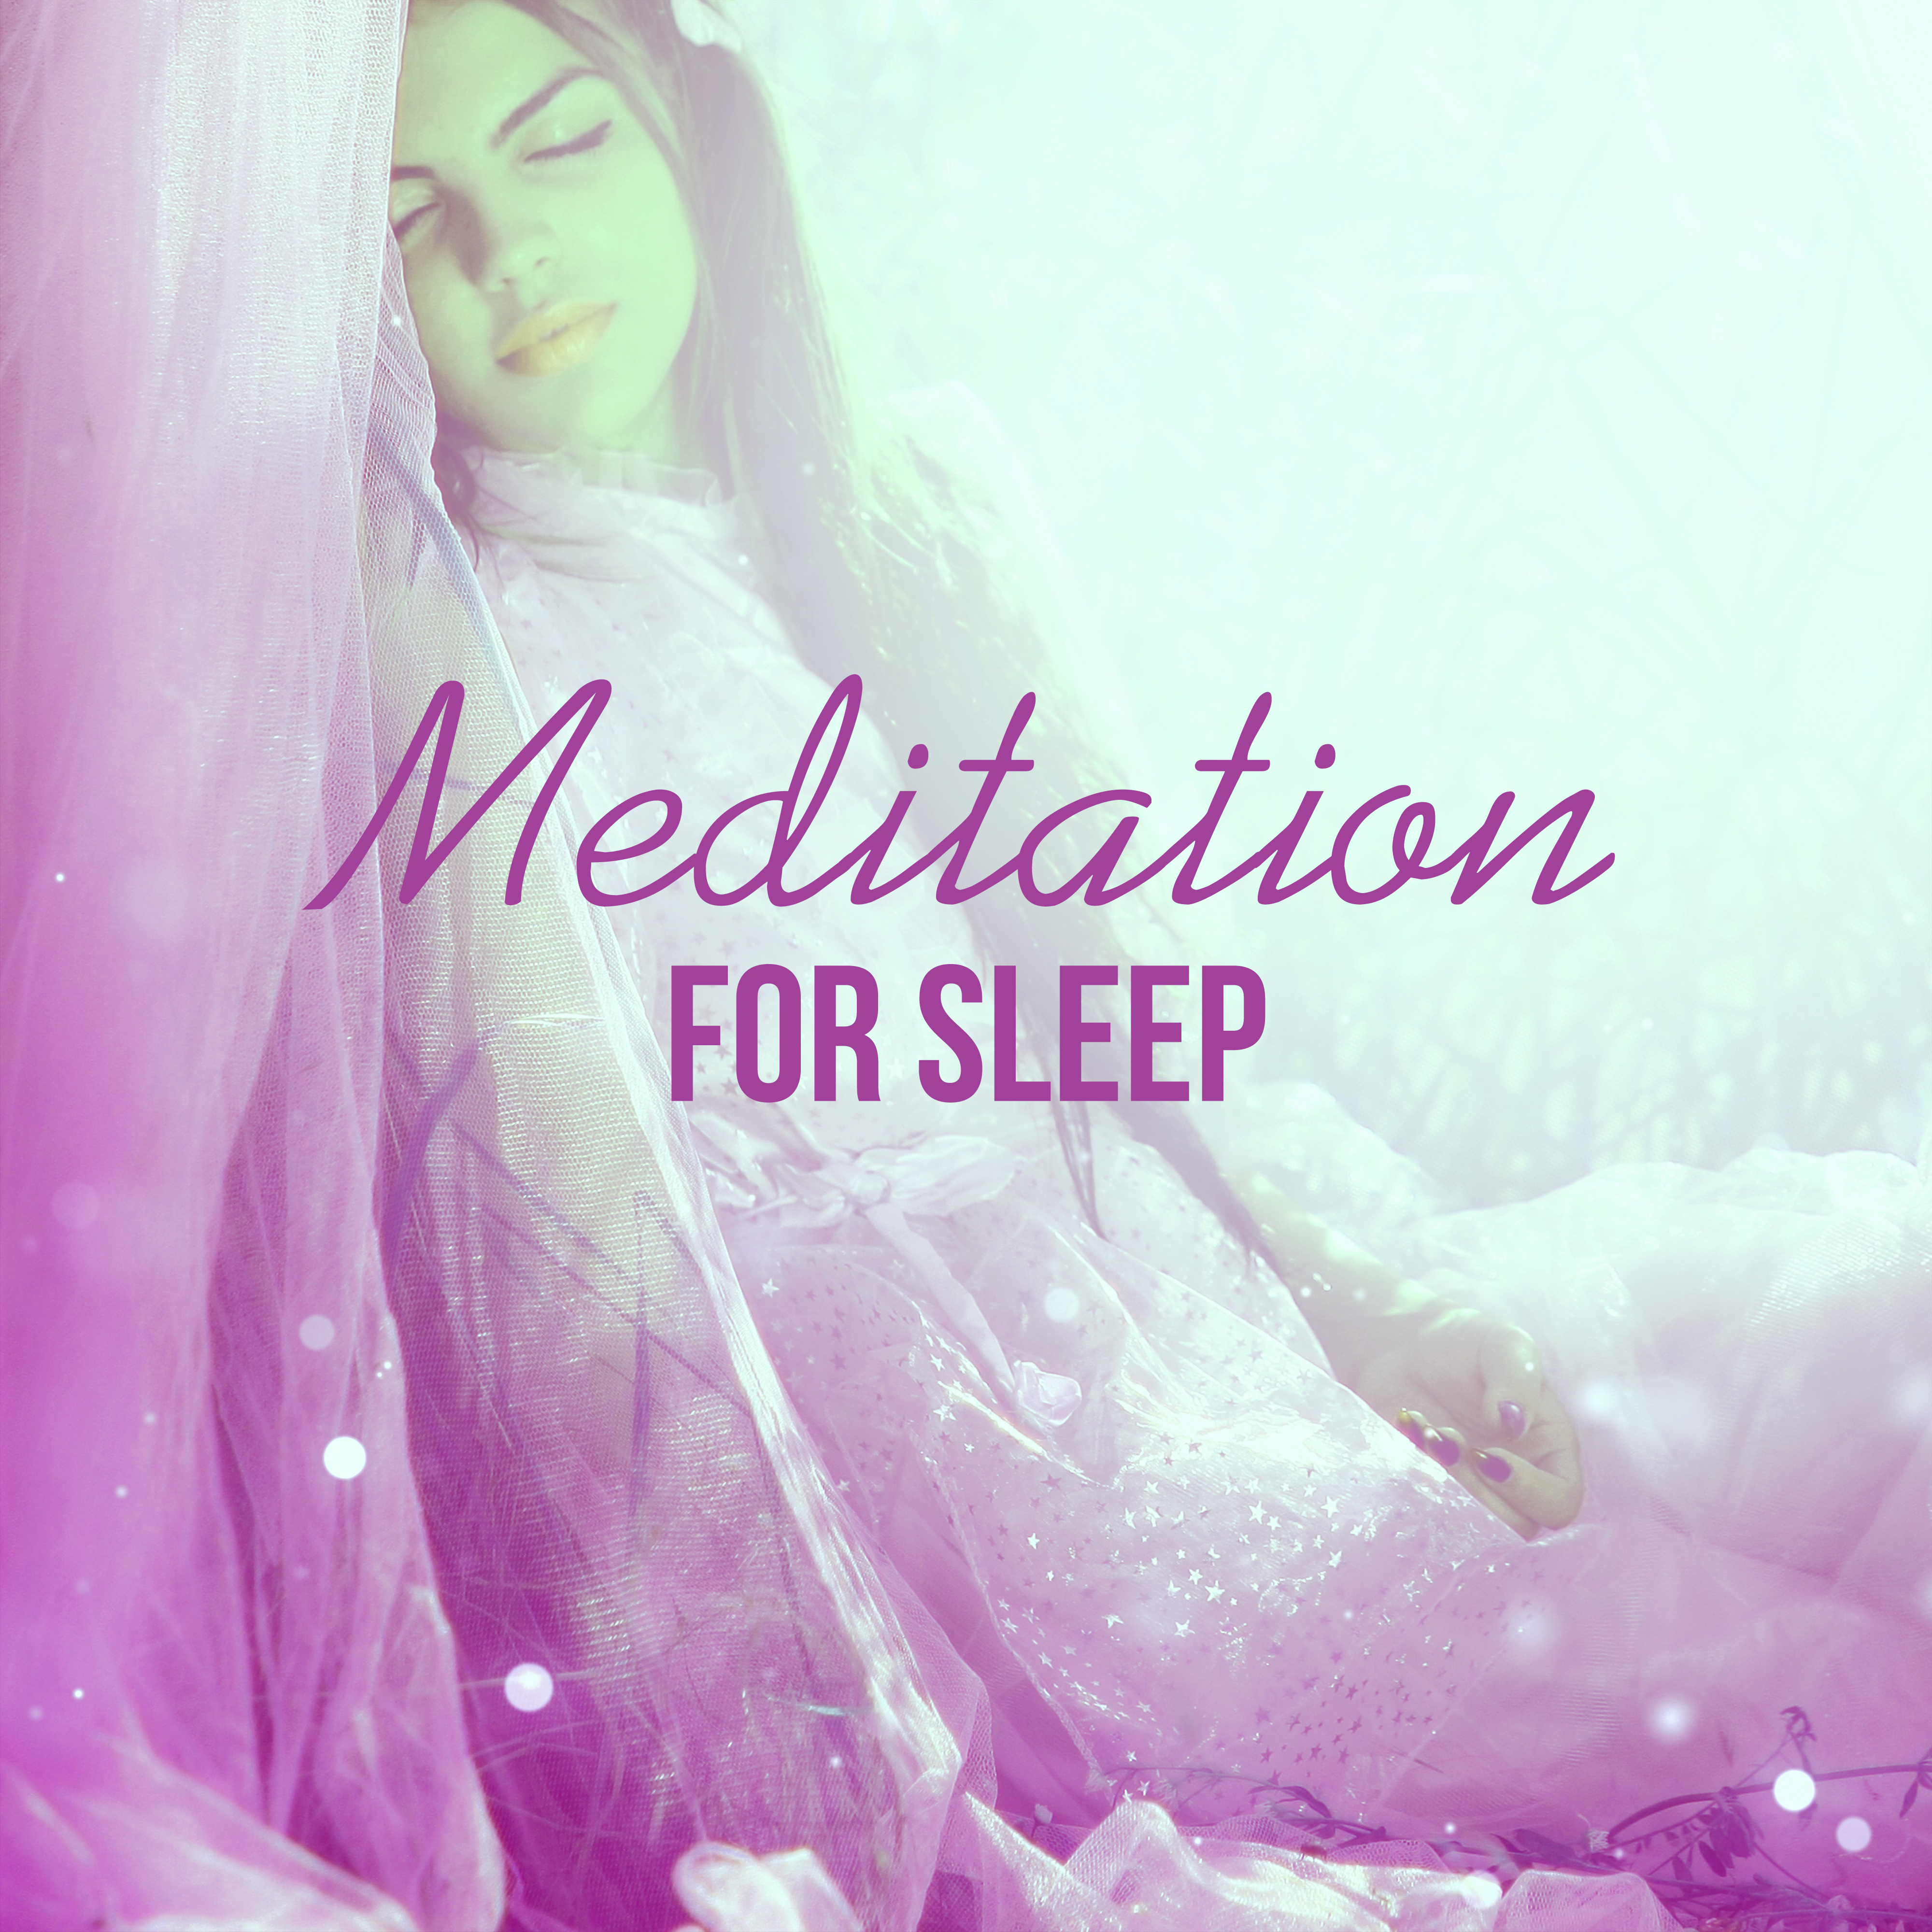 Meditation for Sleep – Calming Sounds of Nature for Relax Before Sleep, Sleep Music, Meditation